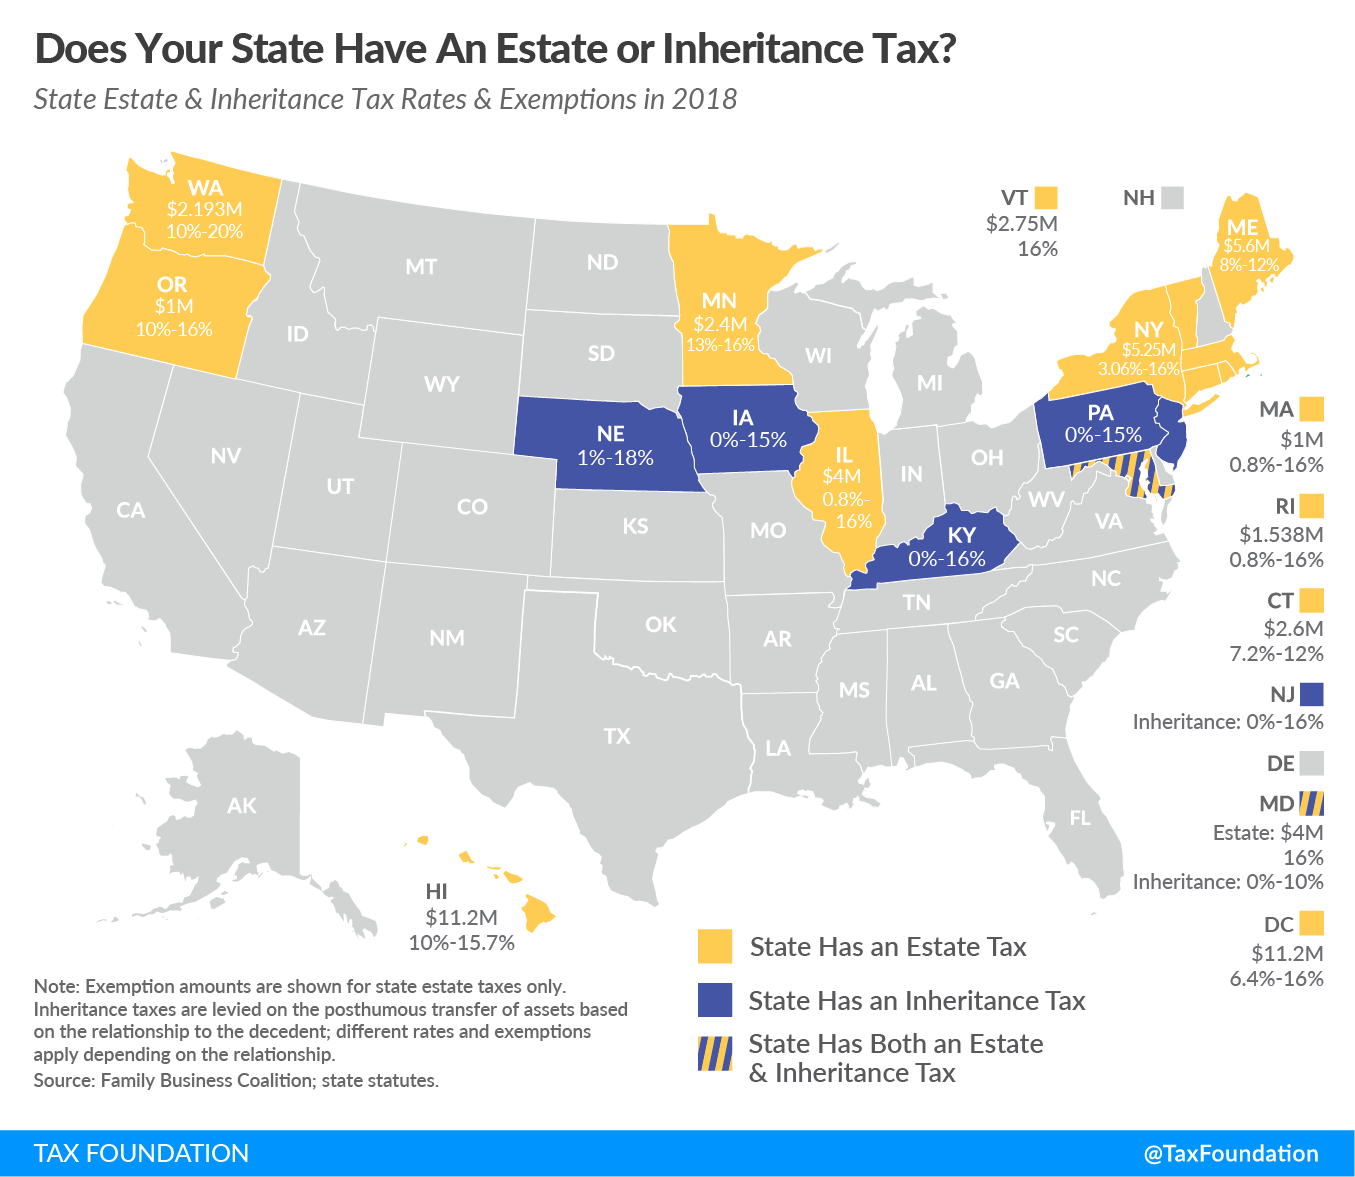 Does Your State Have an Estate Tax or Inheritance Tax ...